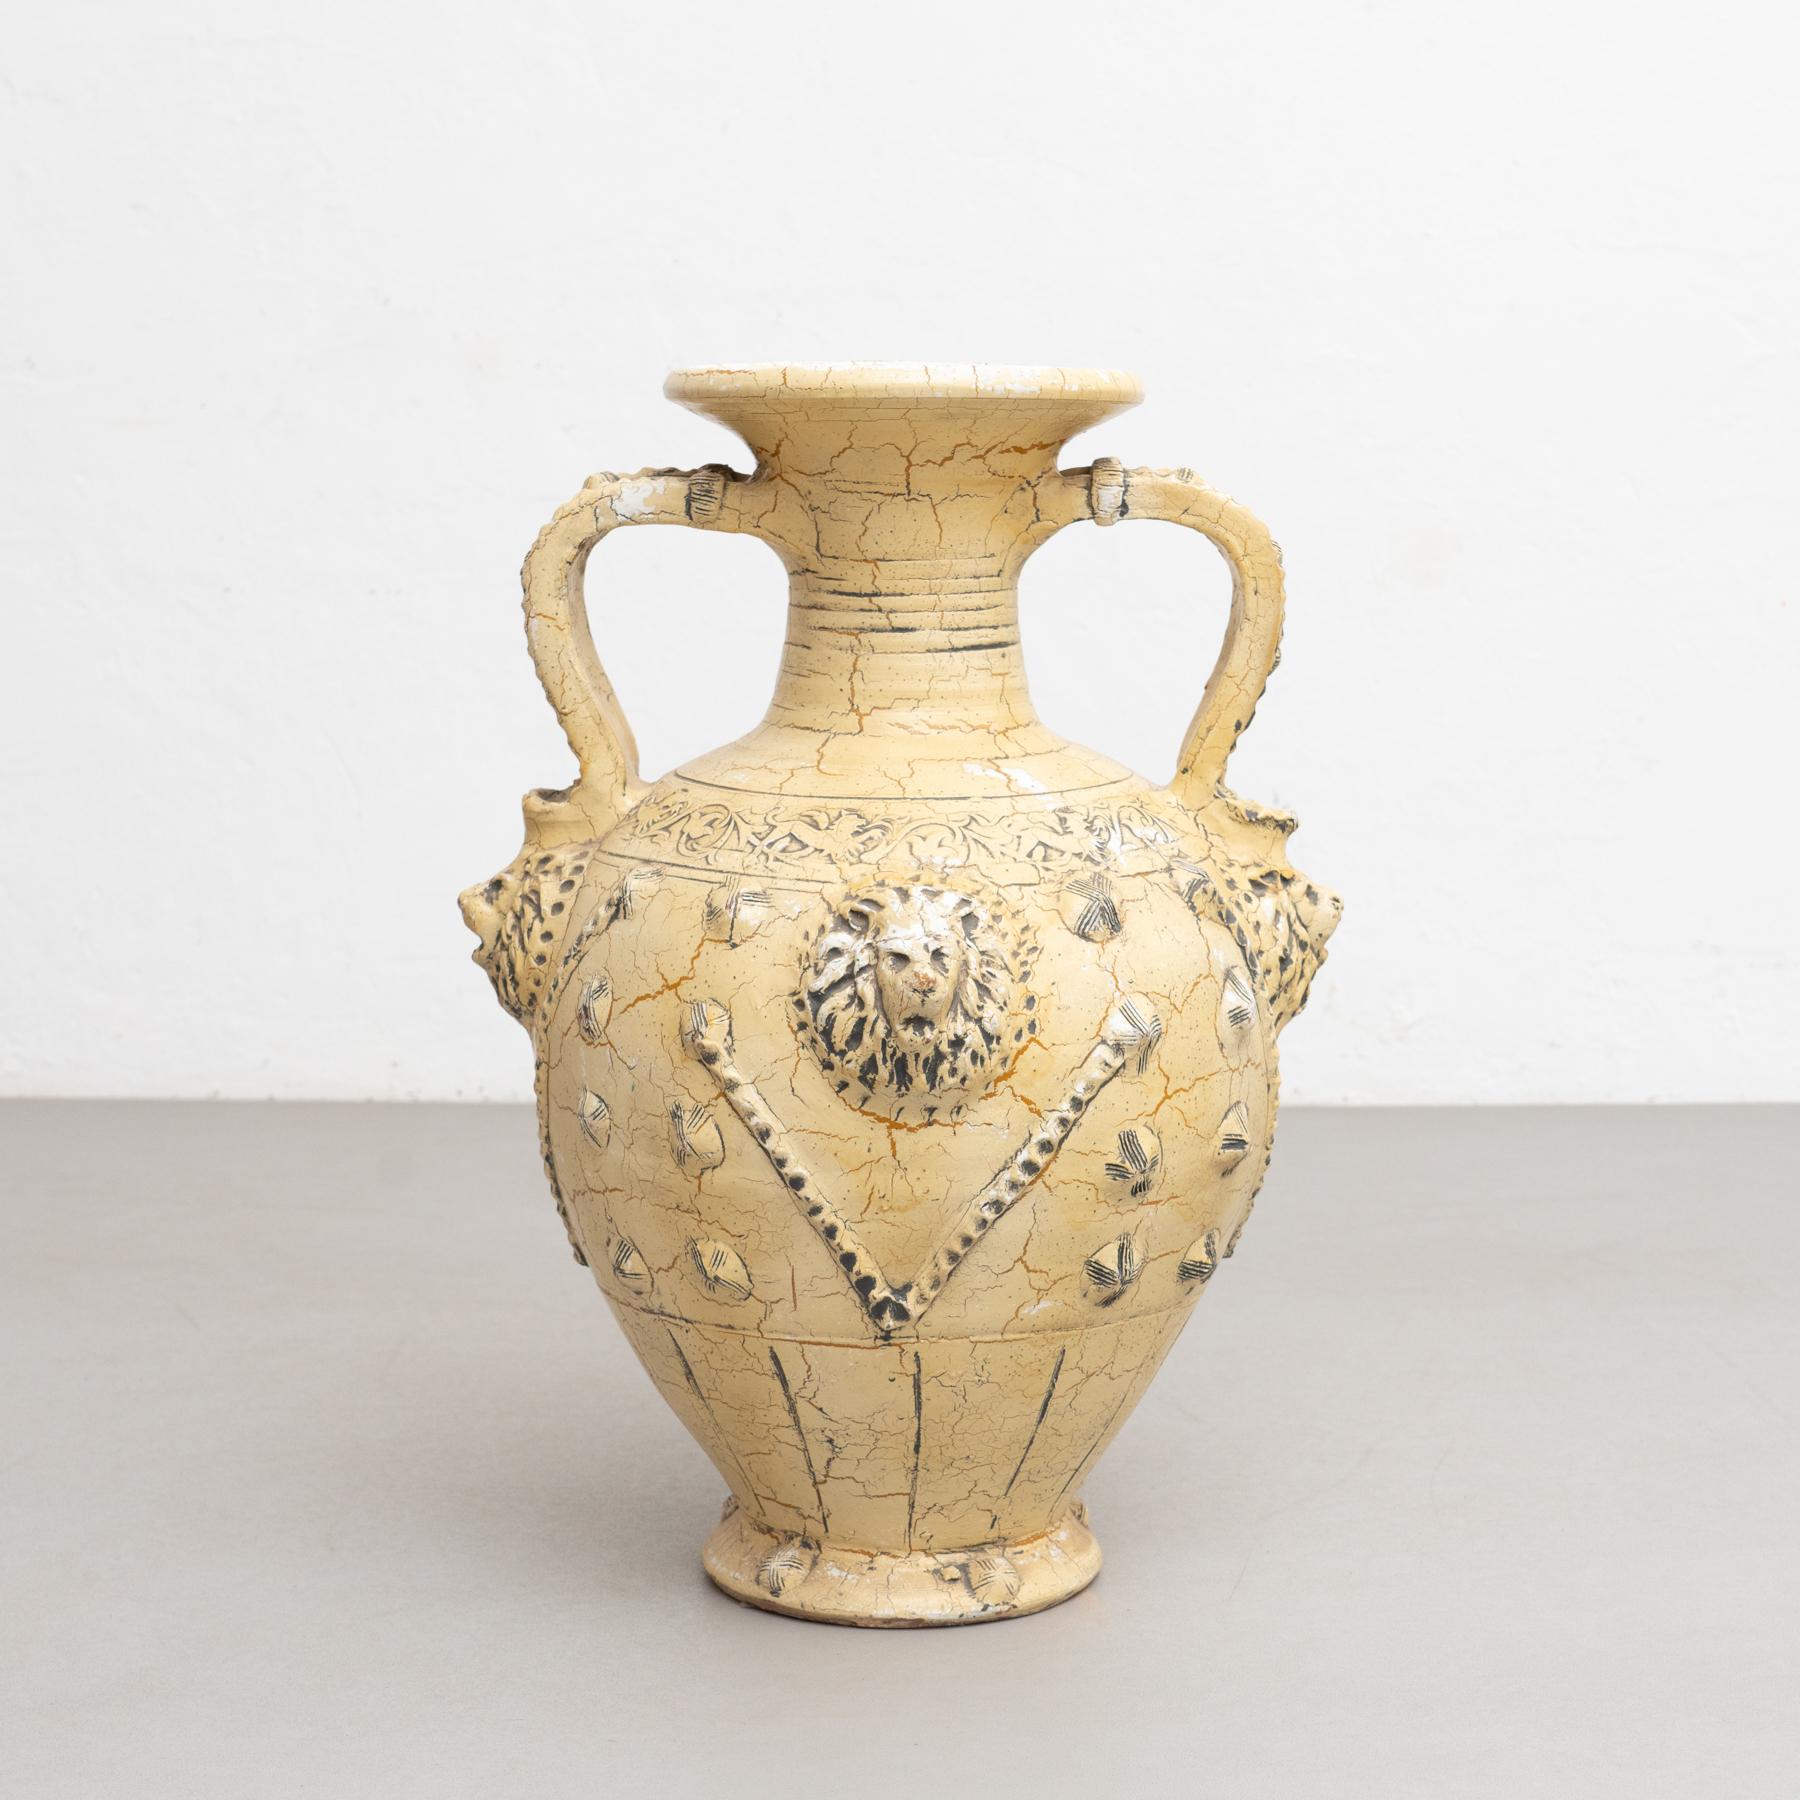 Traditional rustic ceramic vase.

Manufactured in France, circa 1940.

In original condition, with minor wear consistent with age and use, preserving a beautiful patina.